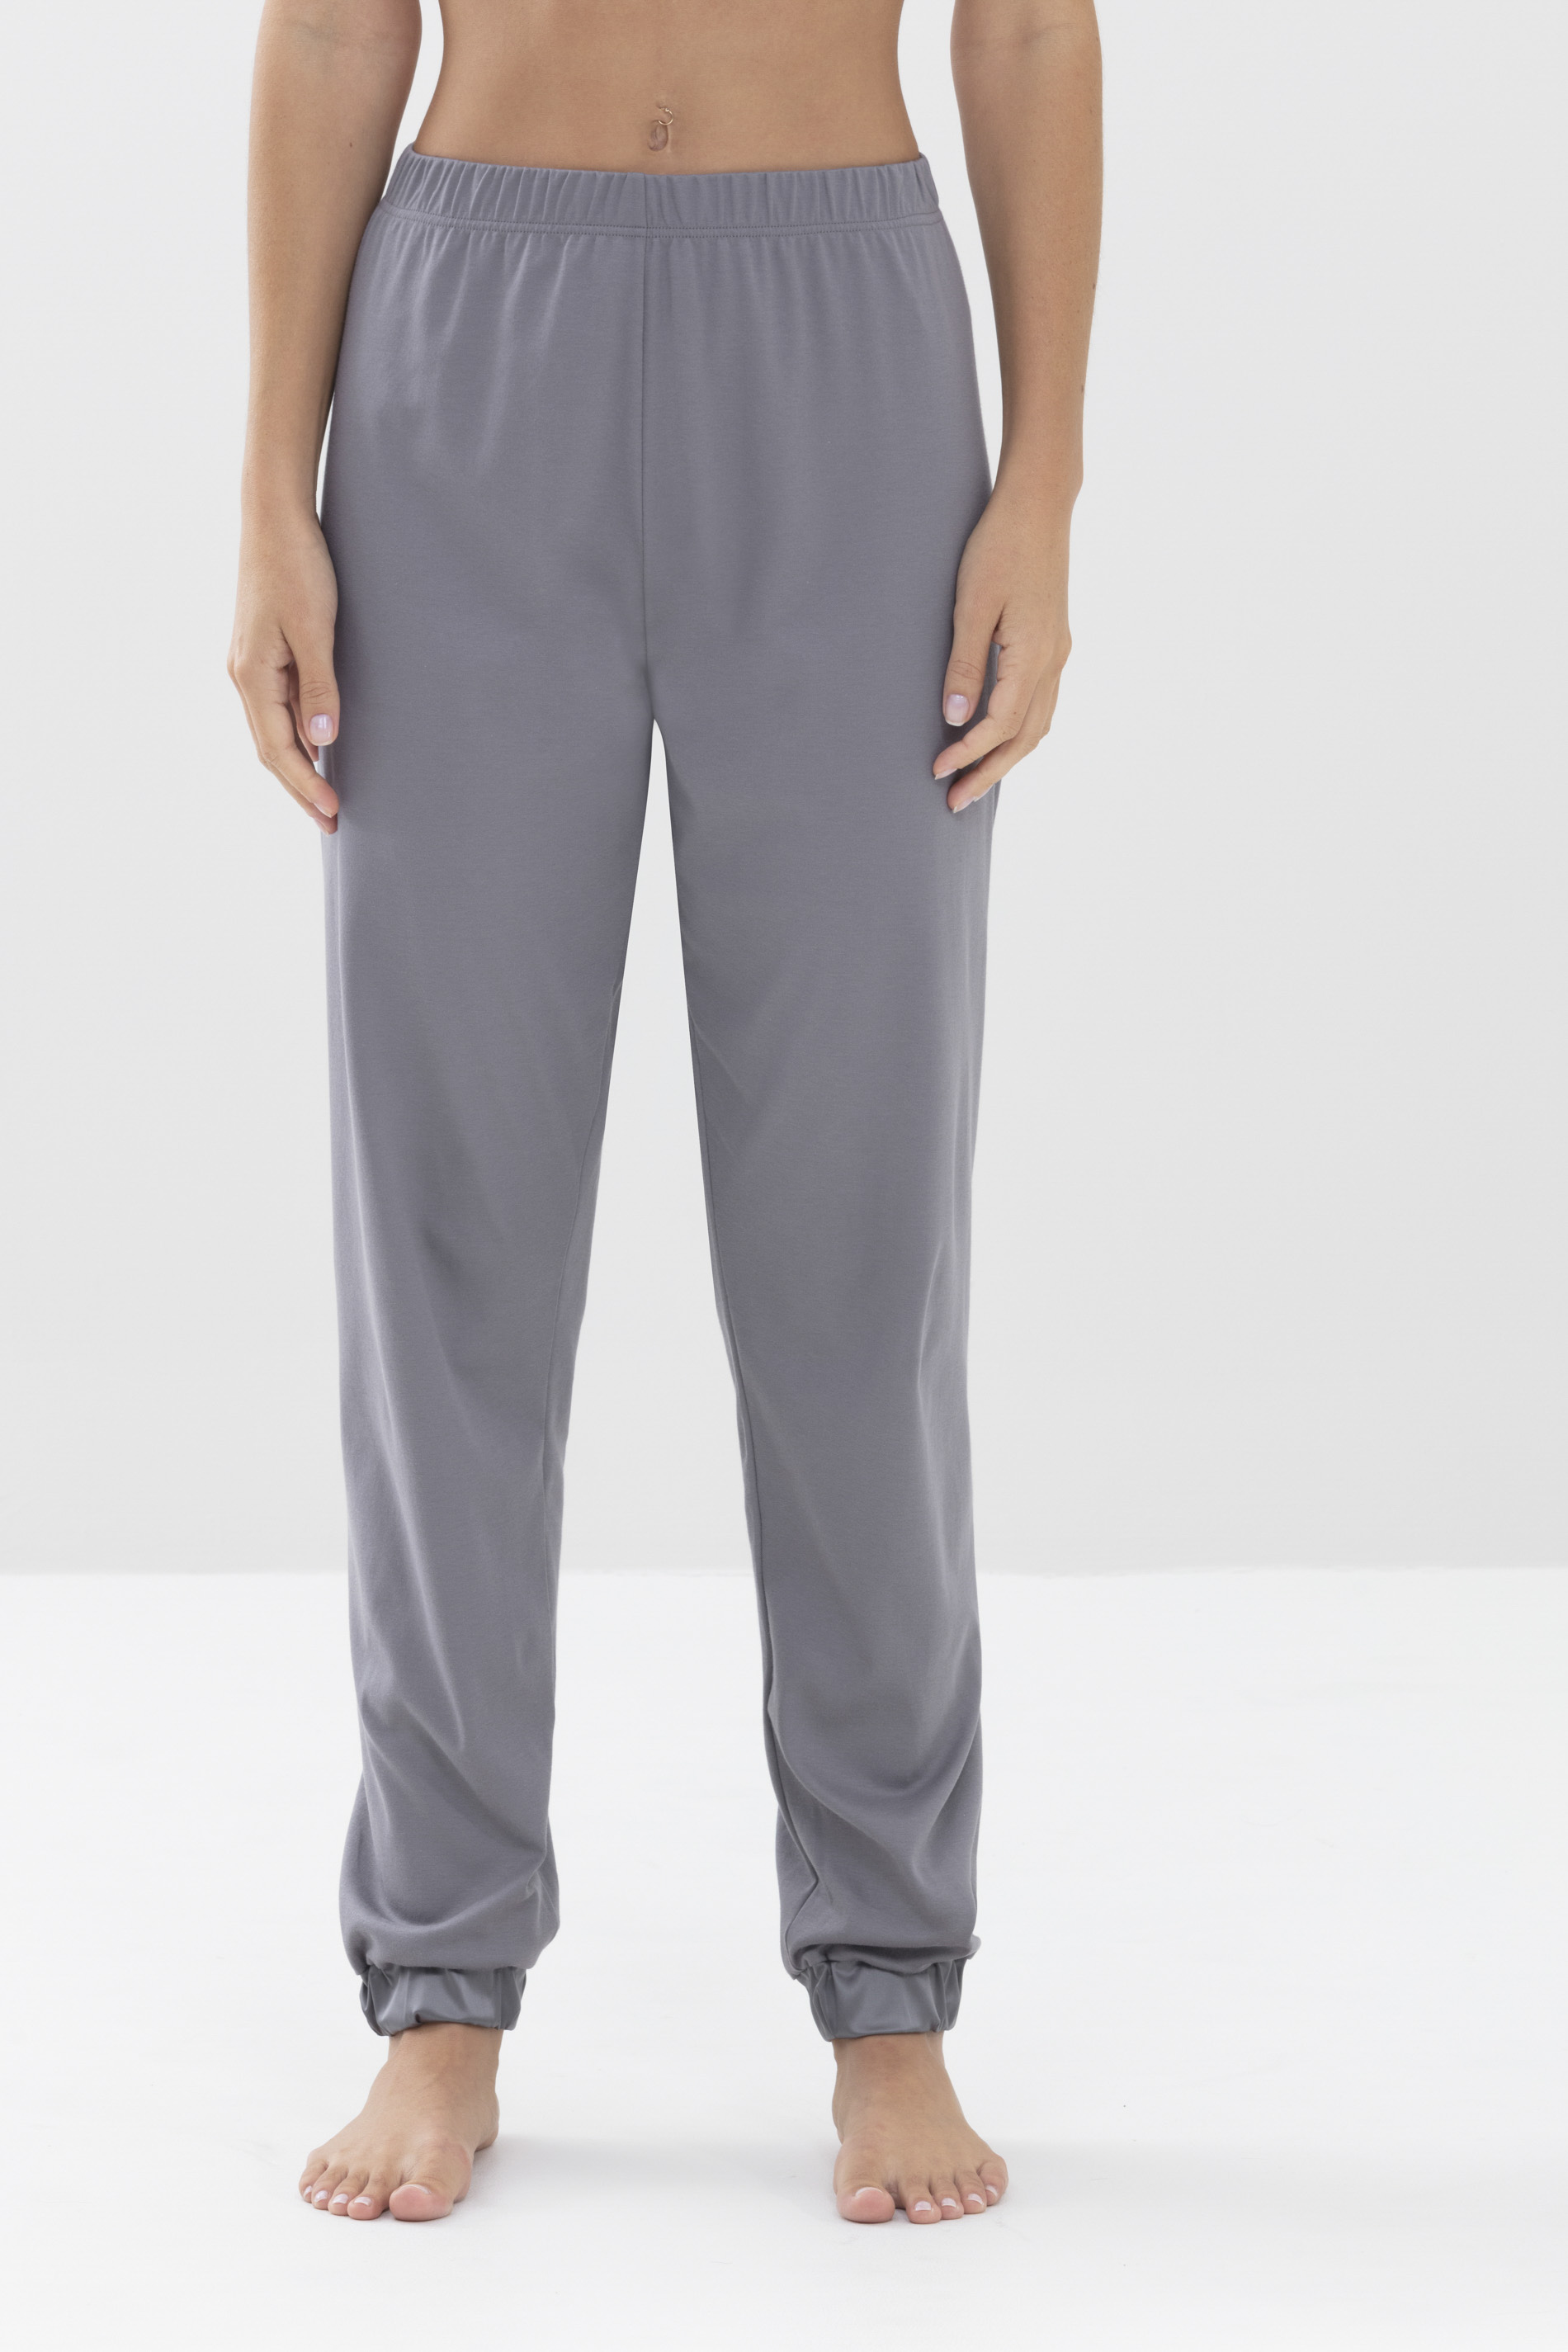 Bottoms Lovely Grey Serie Sleepsation Front View | mey®